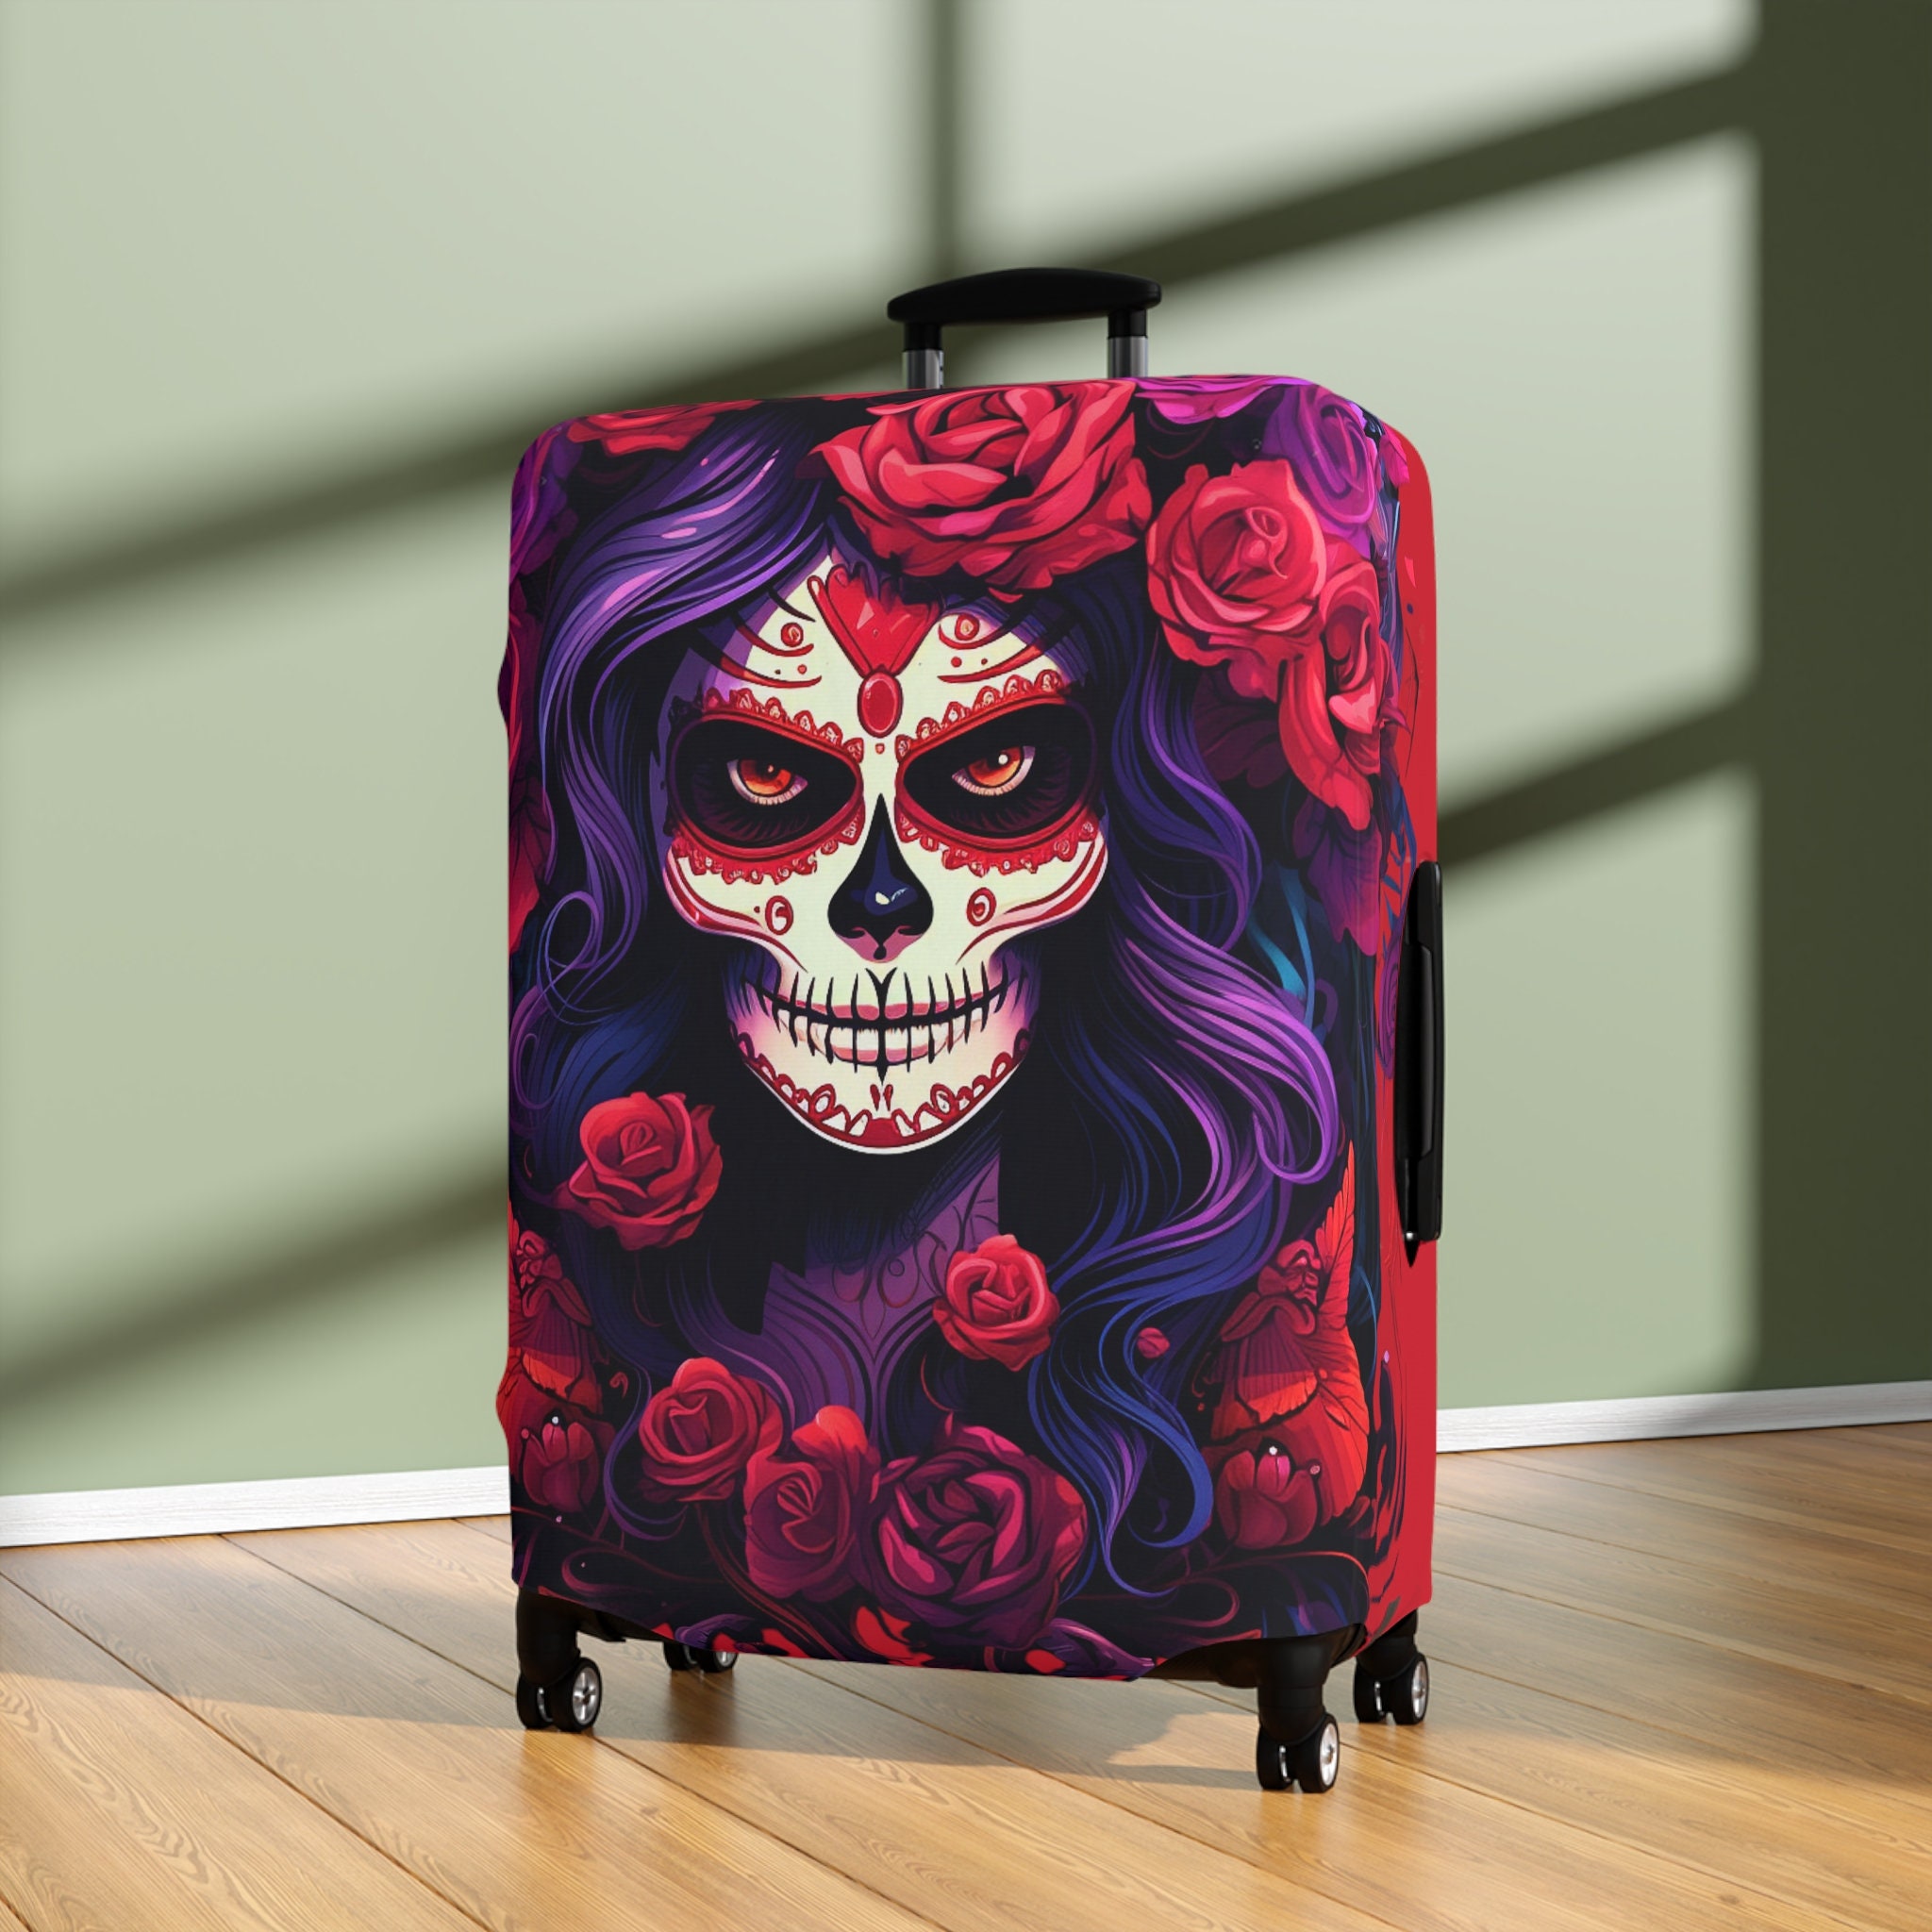 Day Of The Dead Beautiful La Catrina Dia De Los Muertos Pink Purple Red Flowers Halloween Travel Gifts Trick Or Treat Luggage Cover Suitcase